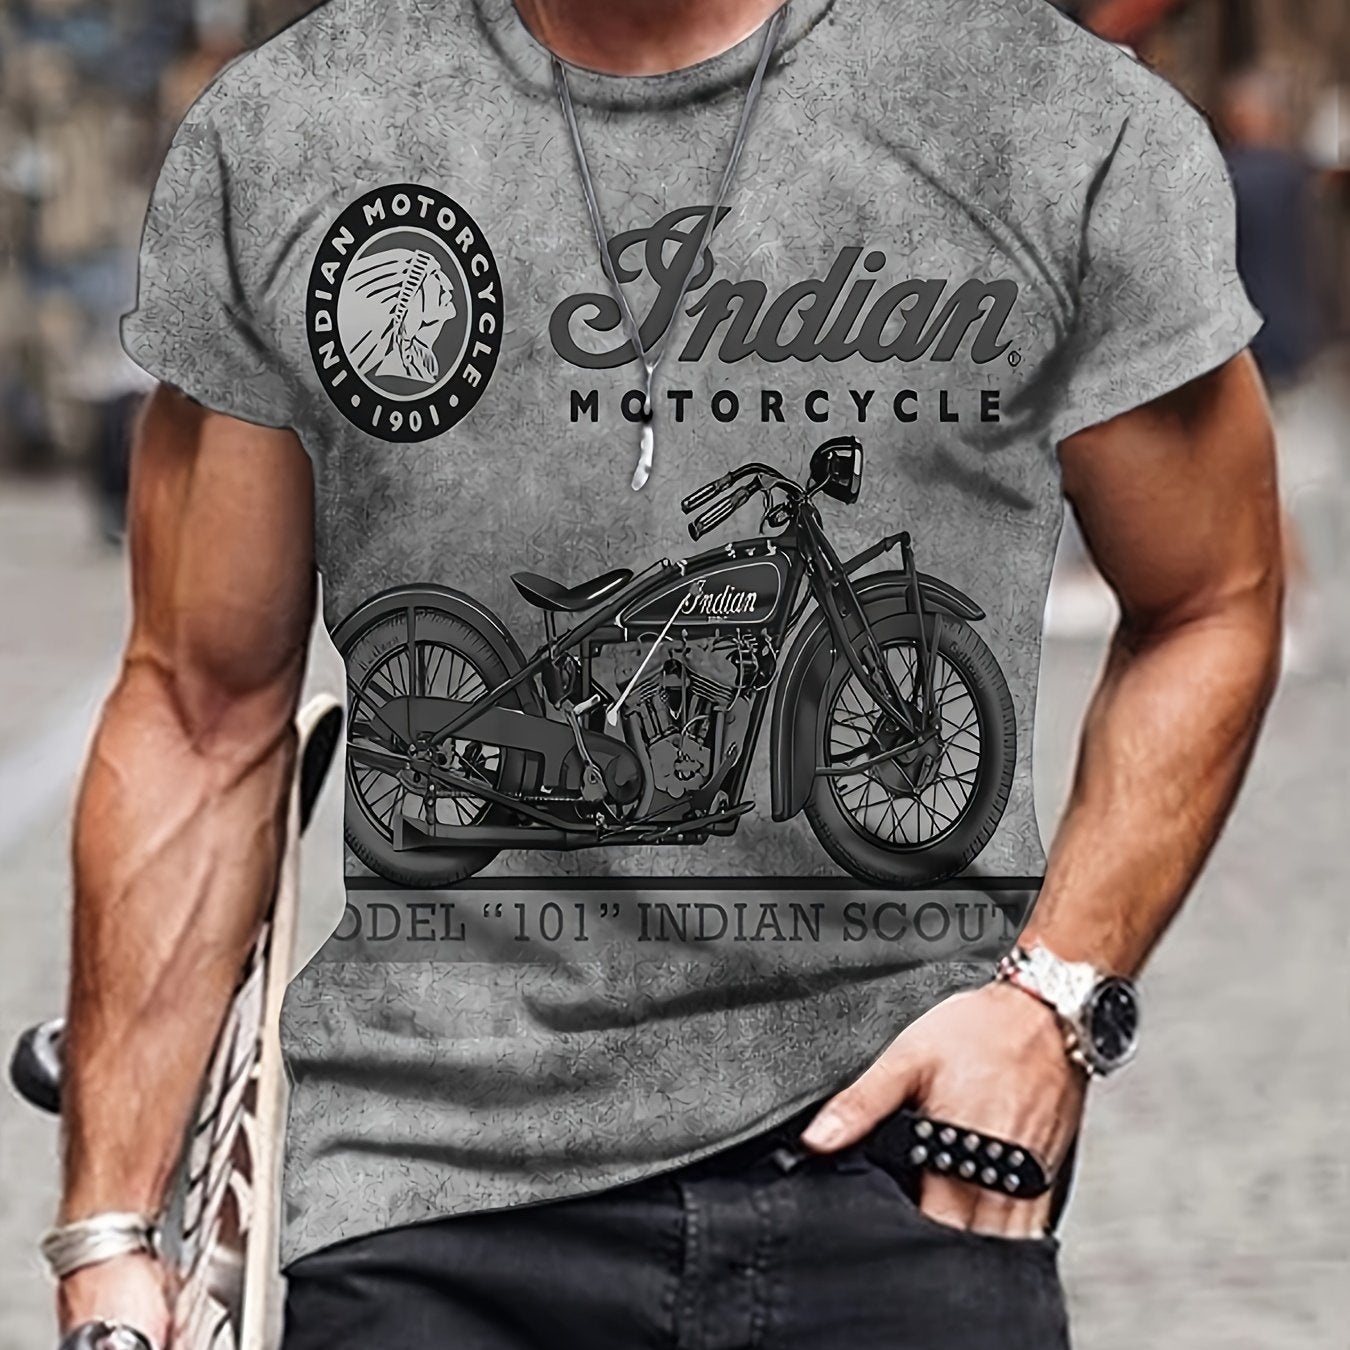 Retro Style Motorcycle Print, Men's Graphic T-shirt, Casual Comfy Tees For Summer, Mens Clothing